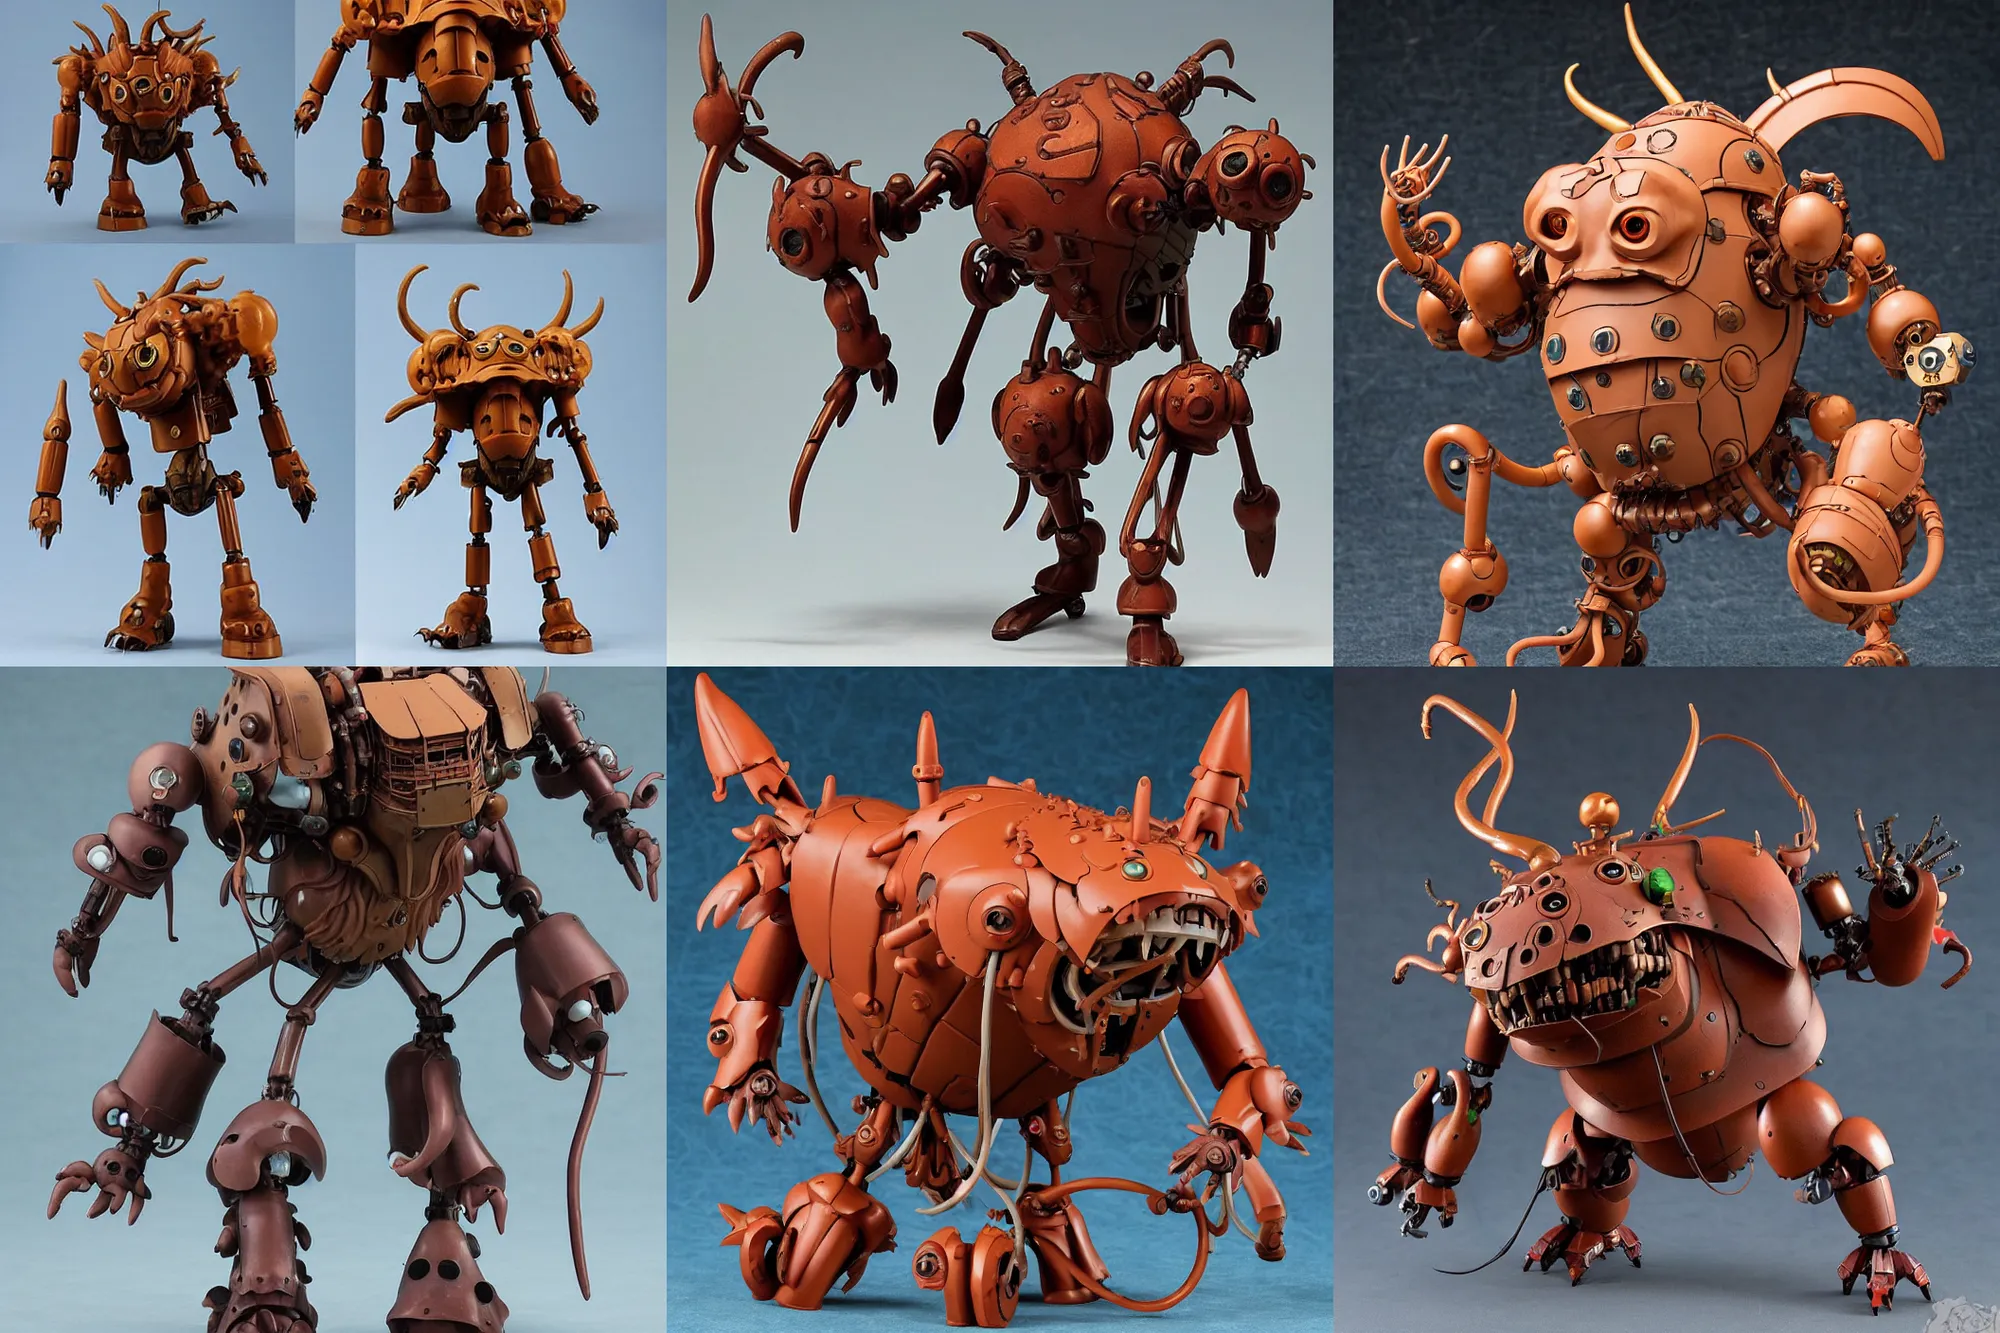 Prompt: A Lovecraftian giant mechanized adorable minotaur from Studio Ghibli Howl's Moving Castle (2004) as a 1980's Kenner style action figure, 5 points of articulation, full body, 4k, highly detailed. award winning sci-fi. look at all that detail!